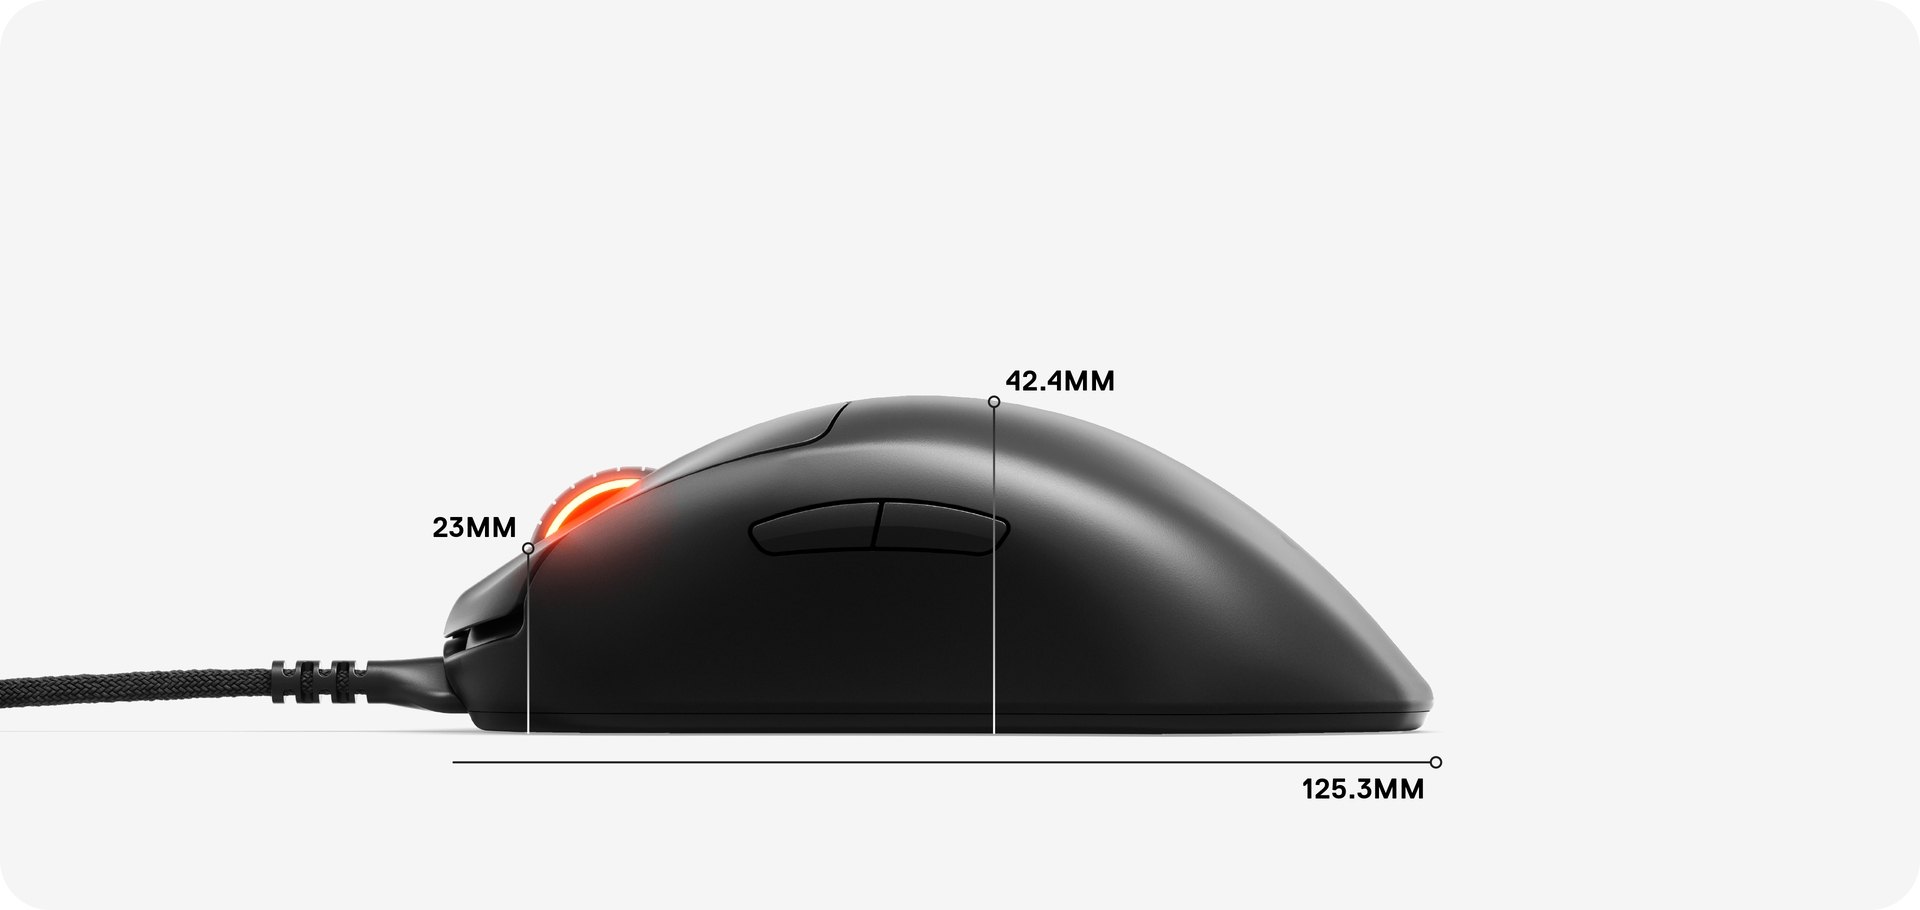 Dimensions for the mouse: 125.3 MM in length, 42.4 MM from palm rest to base, and 23 MM from scroll wheel to base.